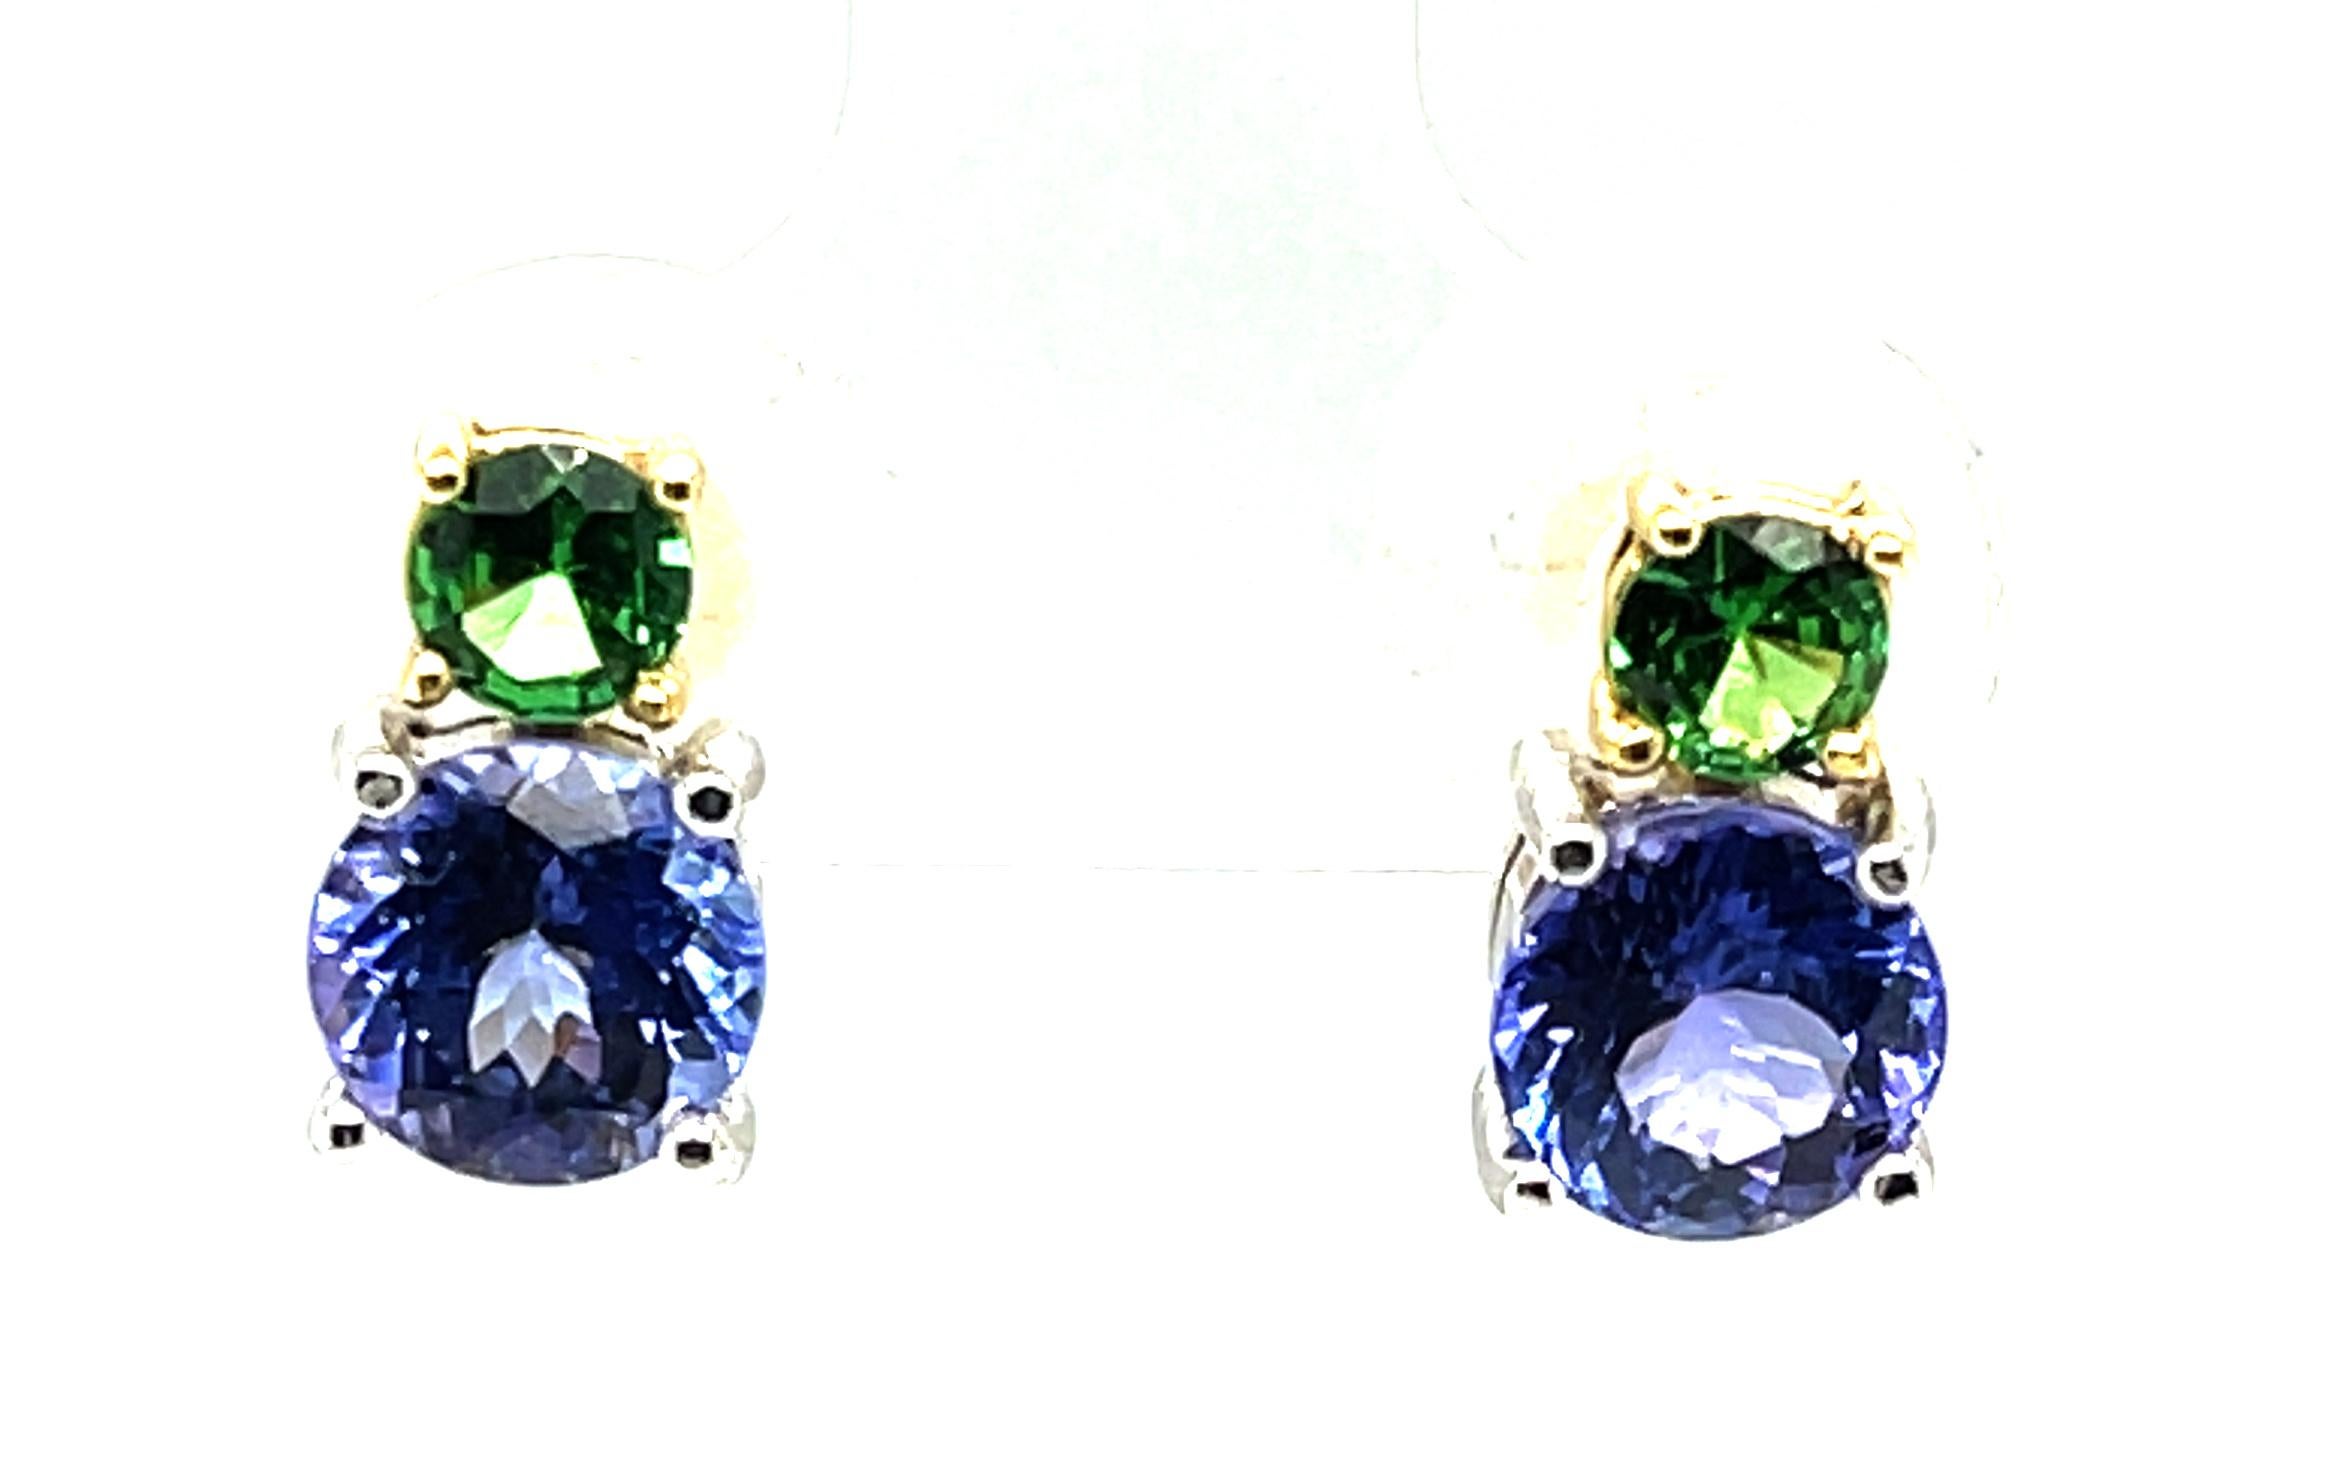 This pair of simple stud earrings are the definition of classic beauty, but with a twist! Two vivid green tsavorite garnets combined with two sparkly lavender-blue tanzanites make these color blocked earrings so unique and beautiful. The gemstones